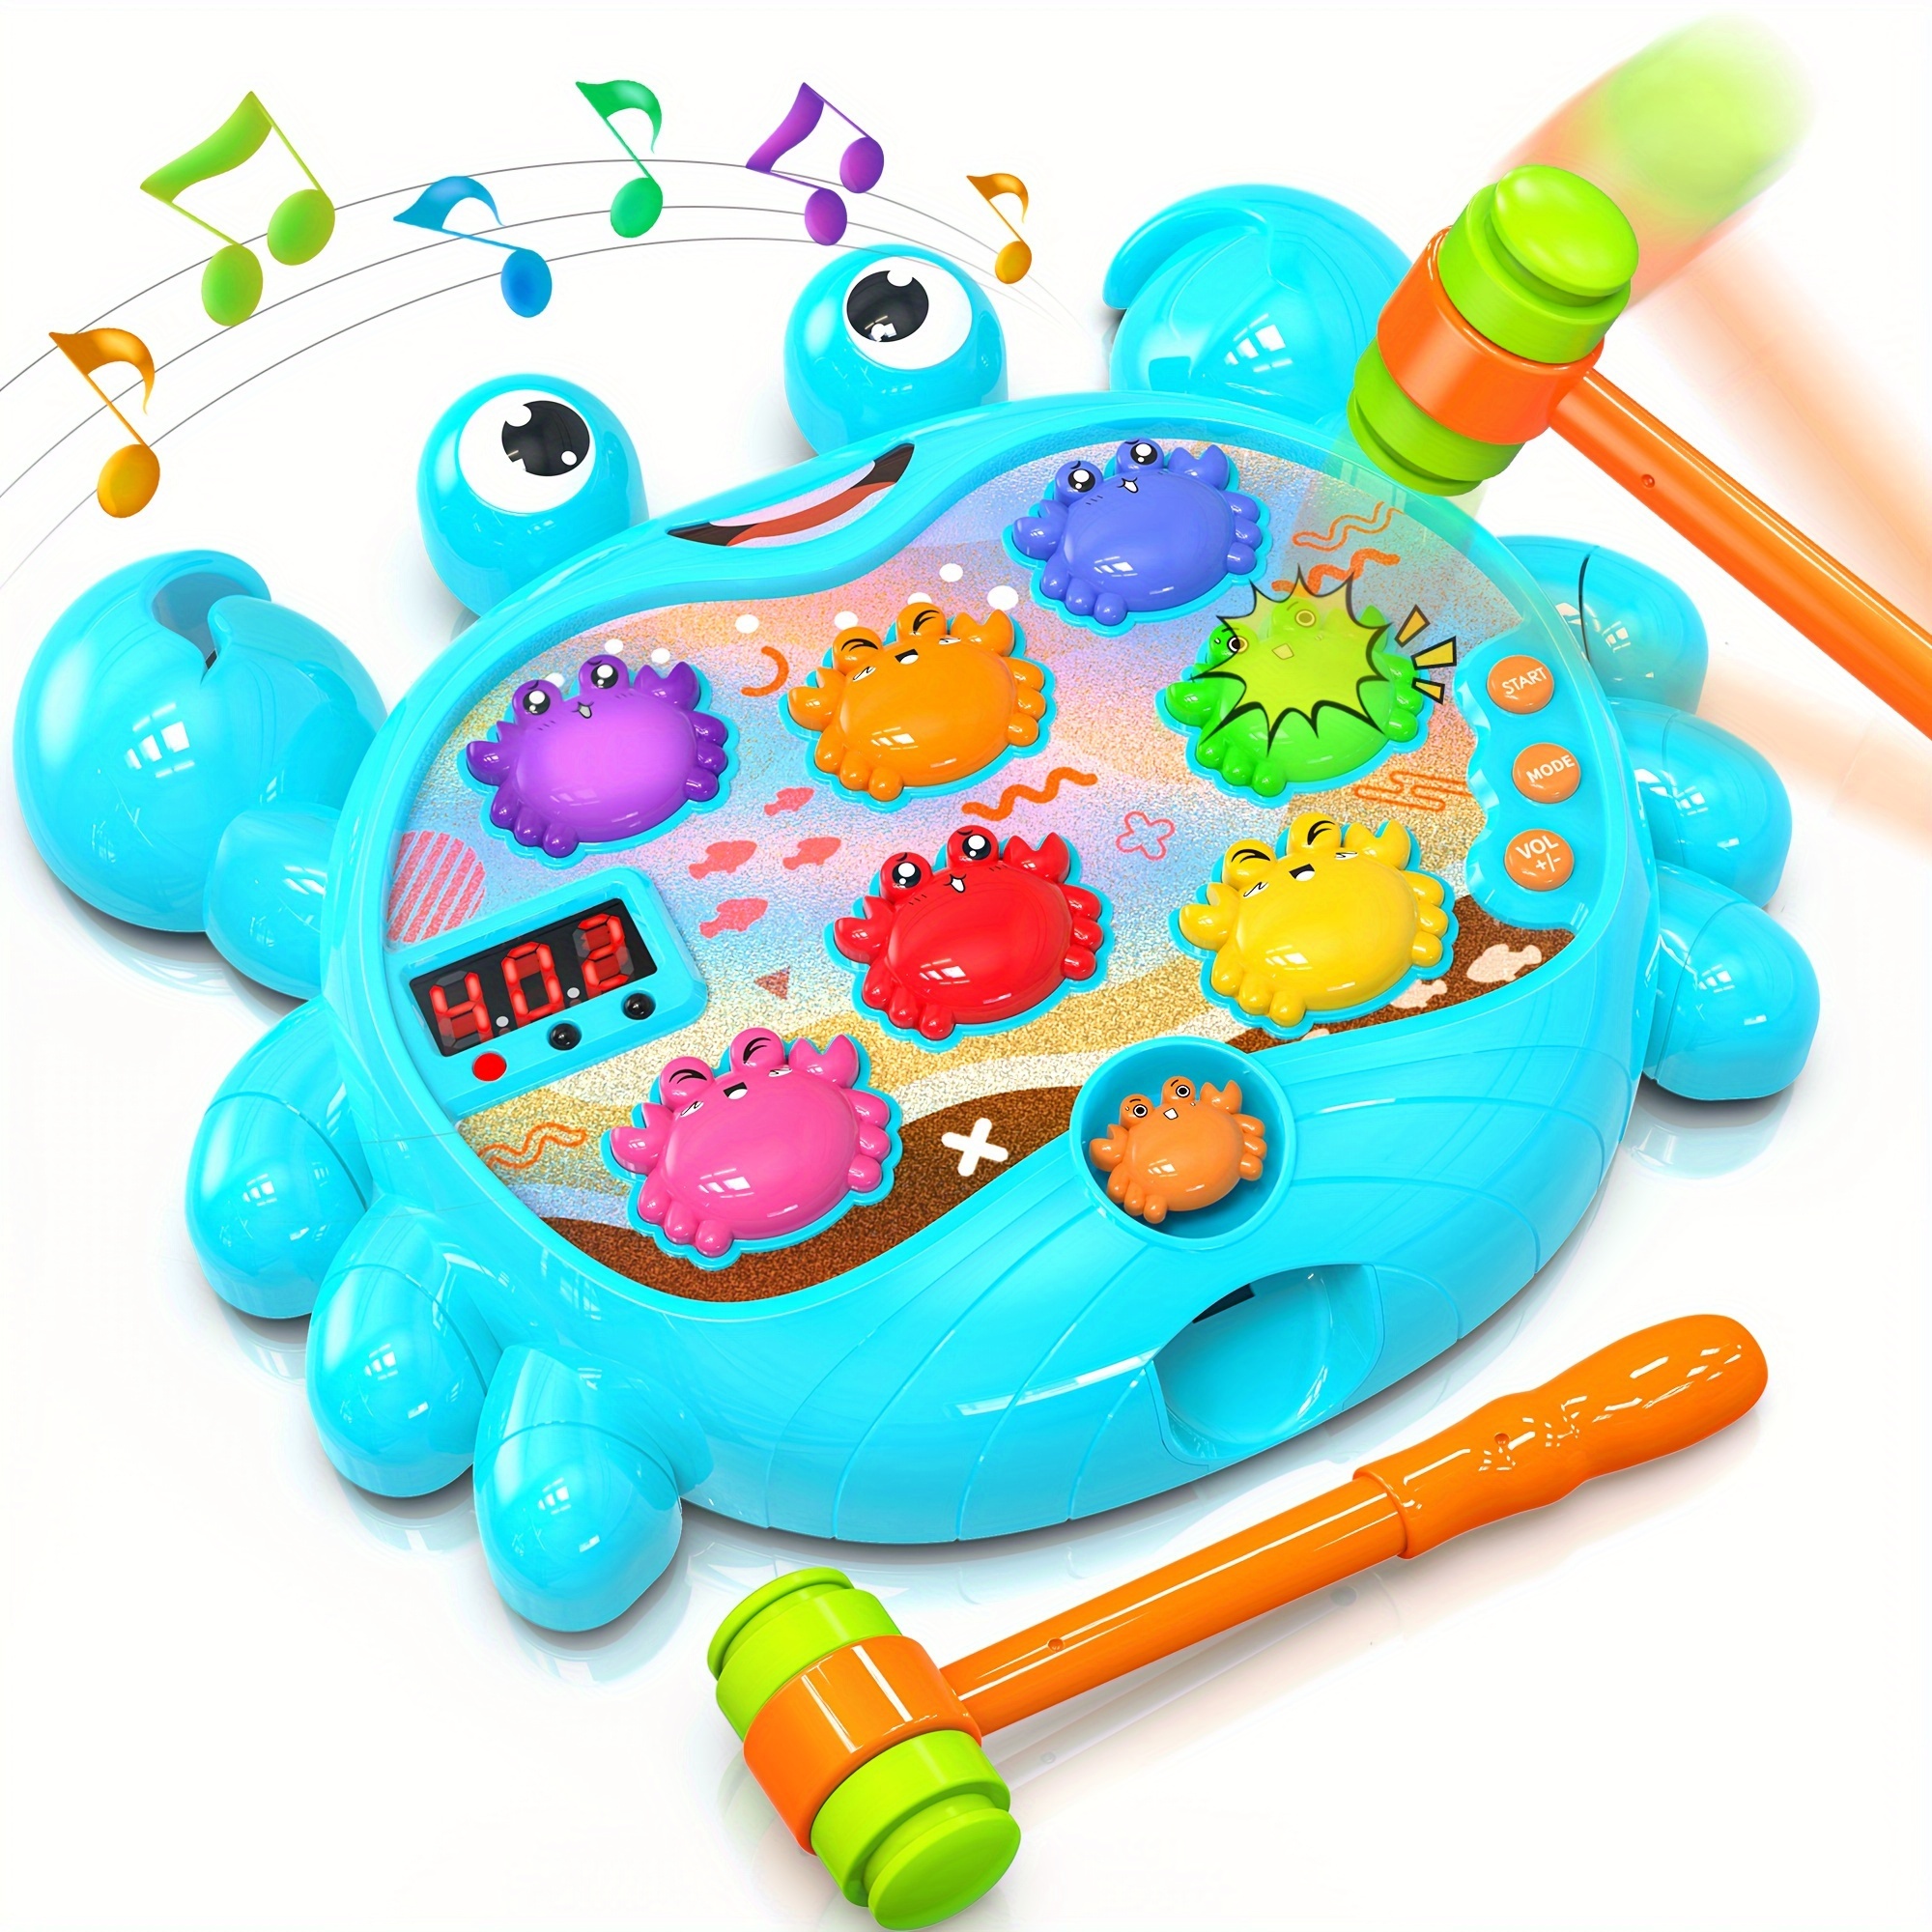 

Whack A Frog Game With 2 Hammers, Toddler Early Developmental Learning Toy, Fun Birthday Gift For Kids Age 2+, Toys For 2 3 4 Year Old Boys Grils